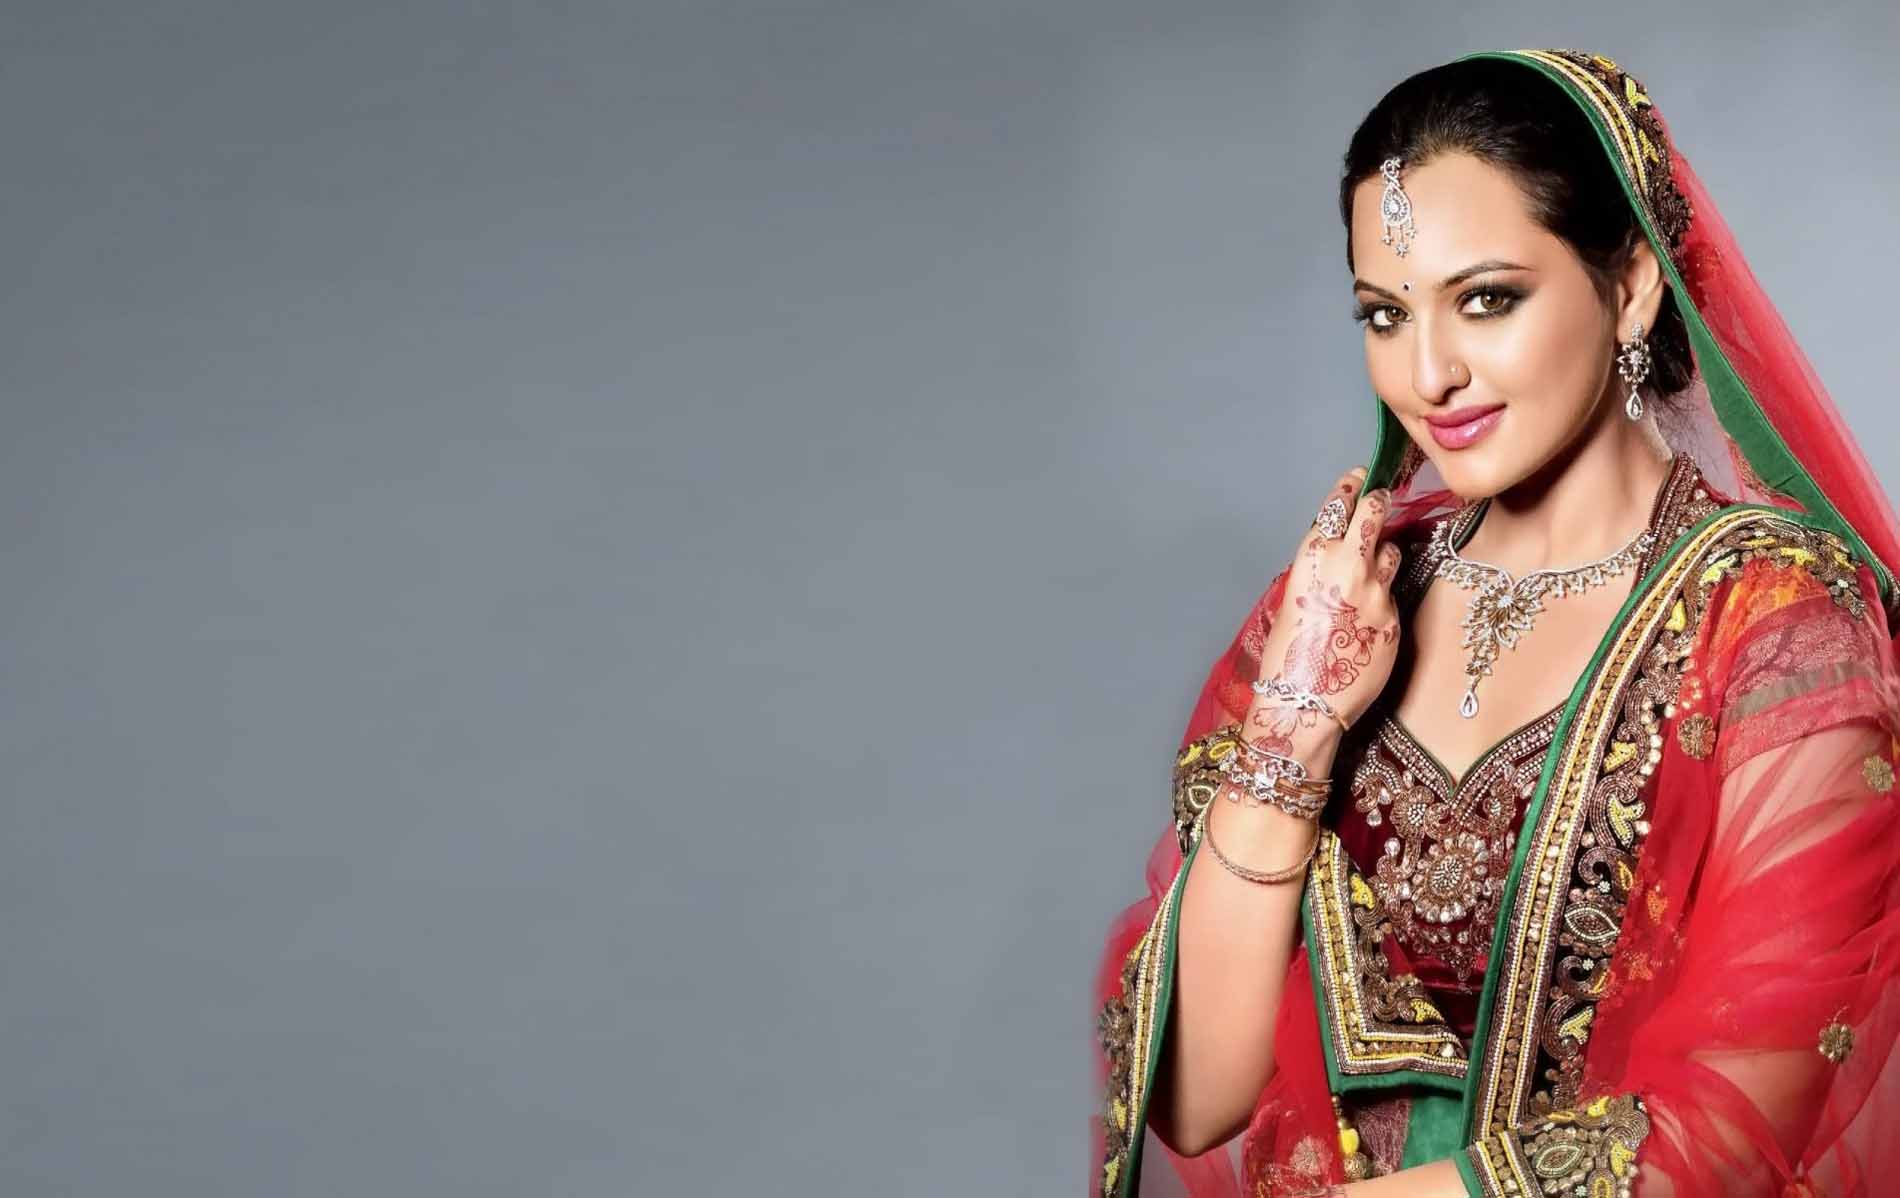 Sonakshi Sinha in dulhan dress Latest HD Wallpapers 1900x1198